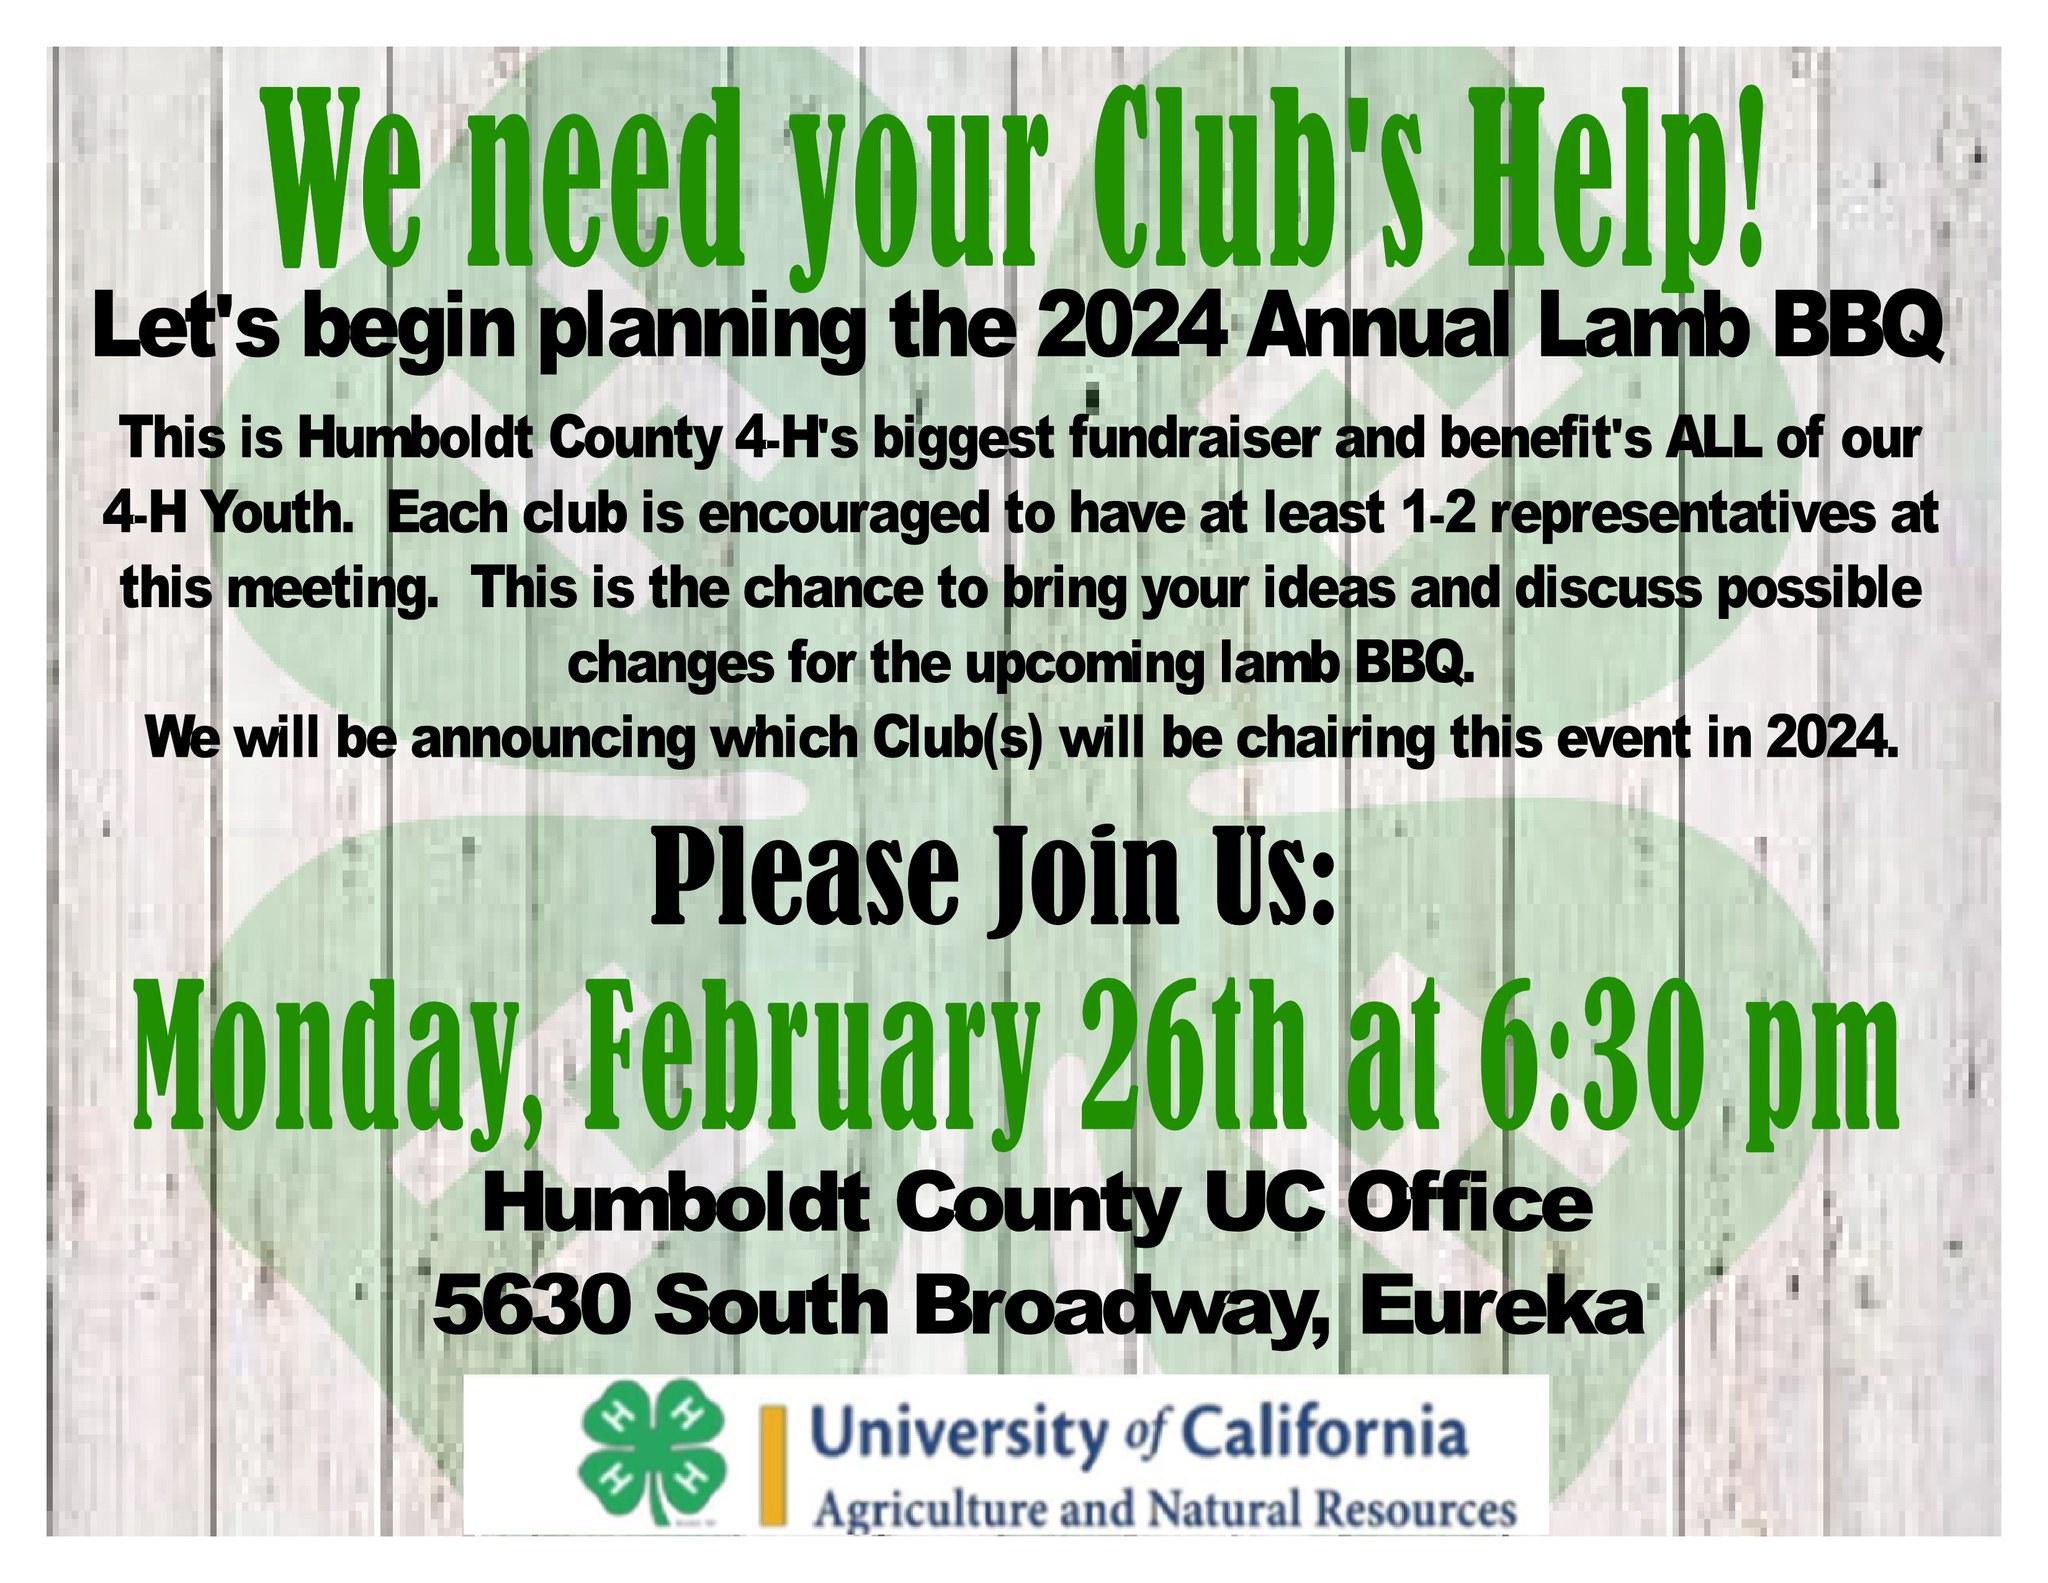 We need your club's help! Let's begin planning the 2024 annual lamb bbq. This is Humboldt County 4-H's biggest fundraiser and benefits ALL of our 4-H